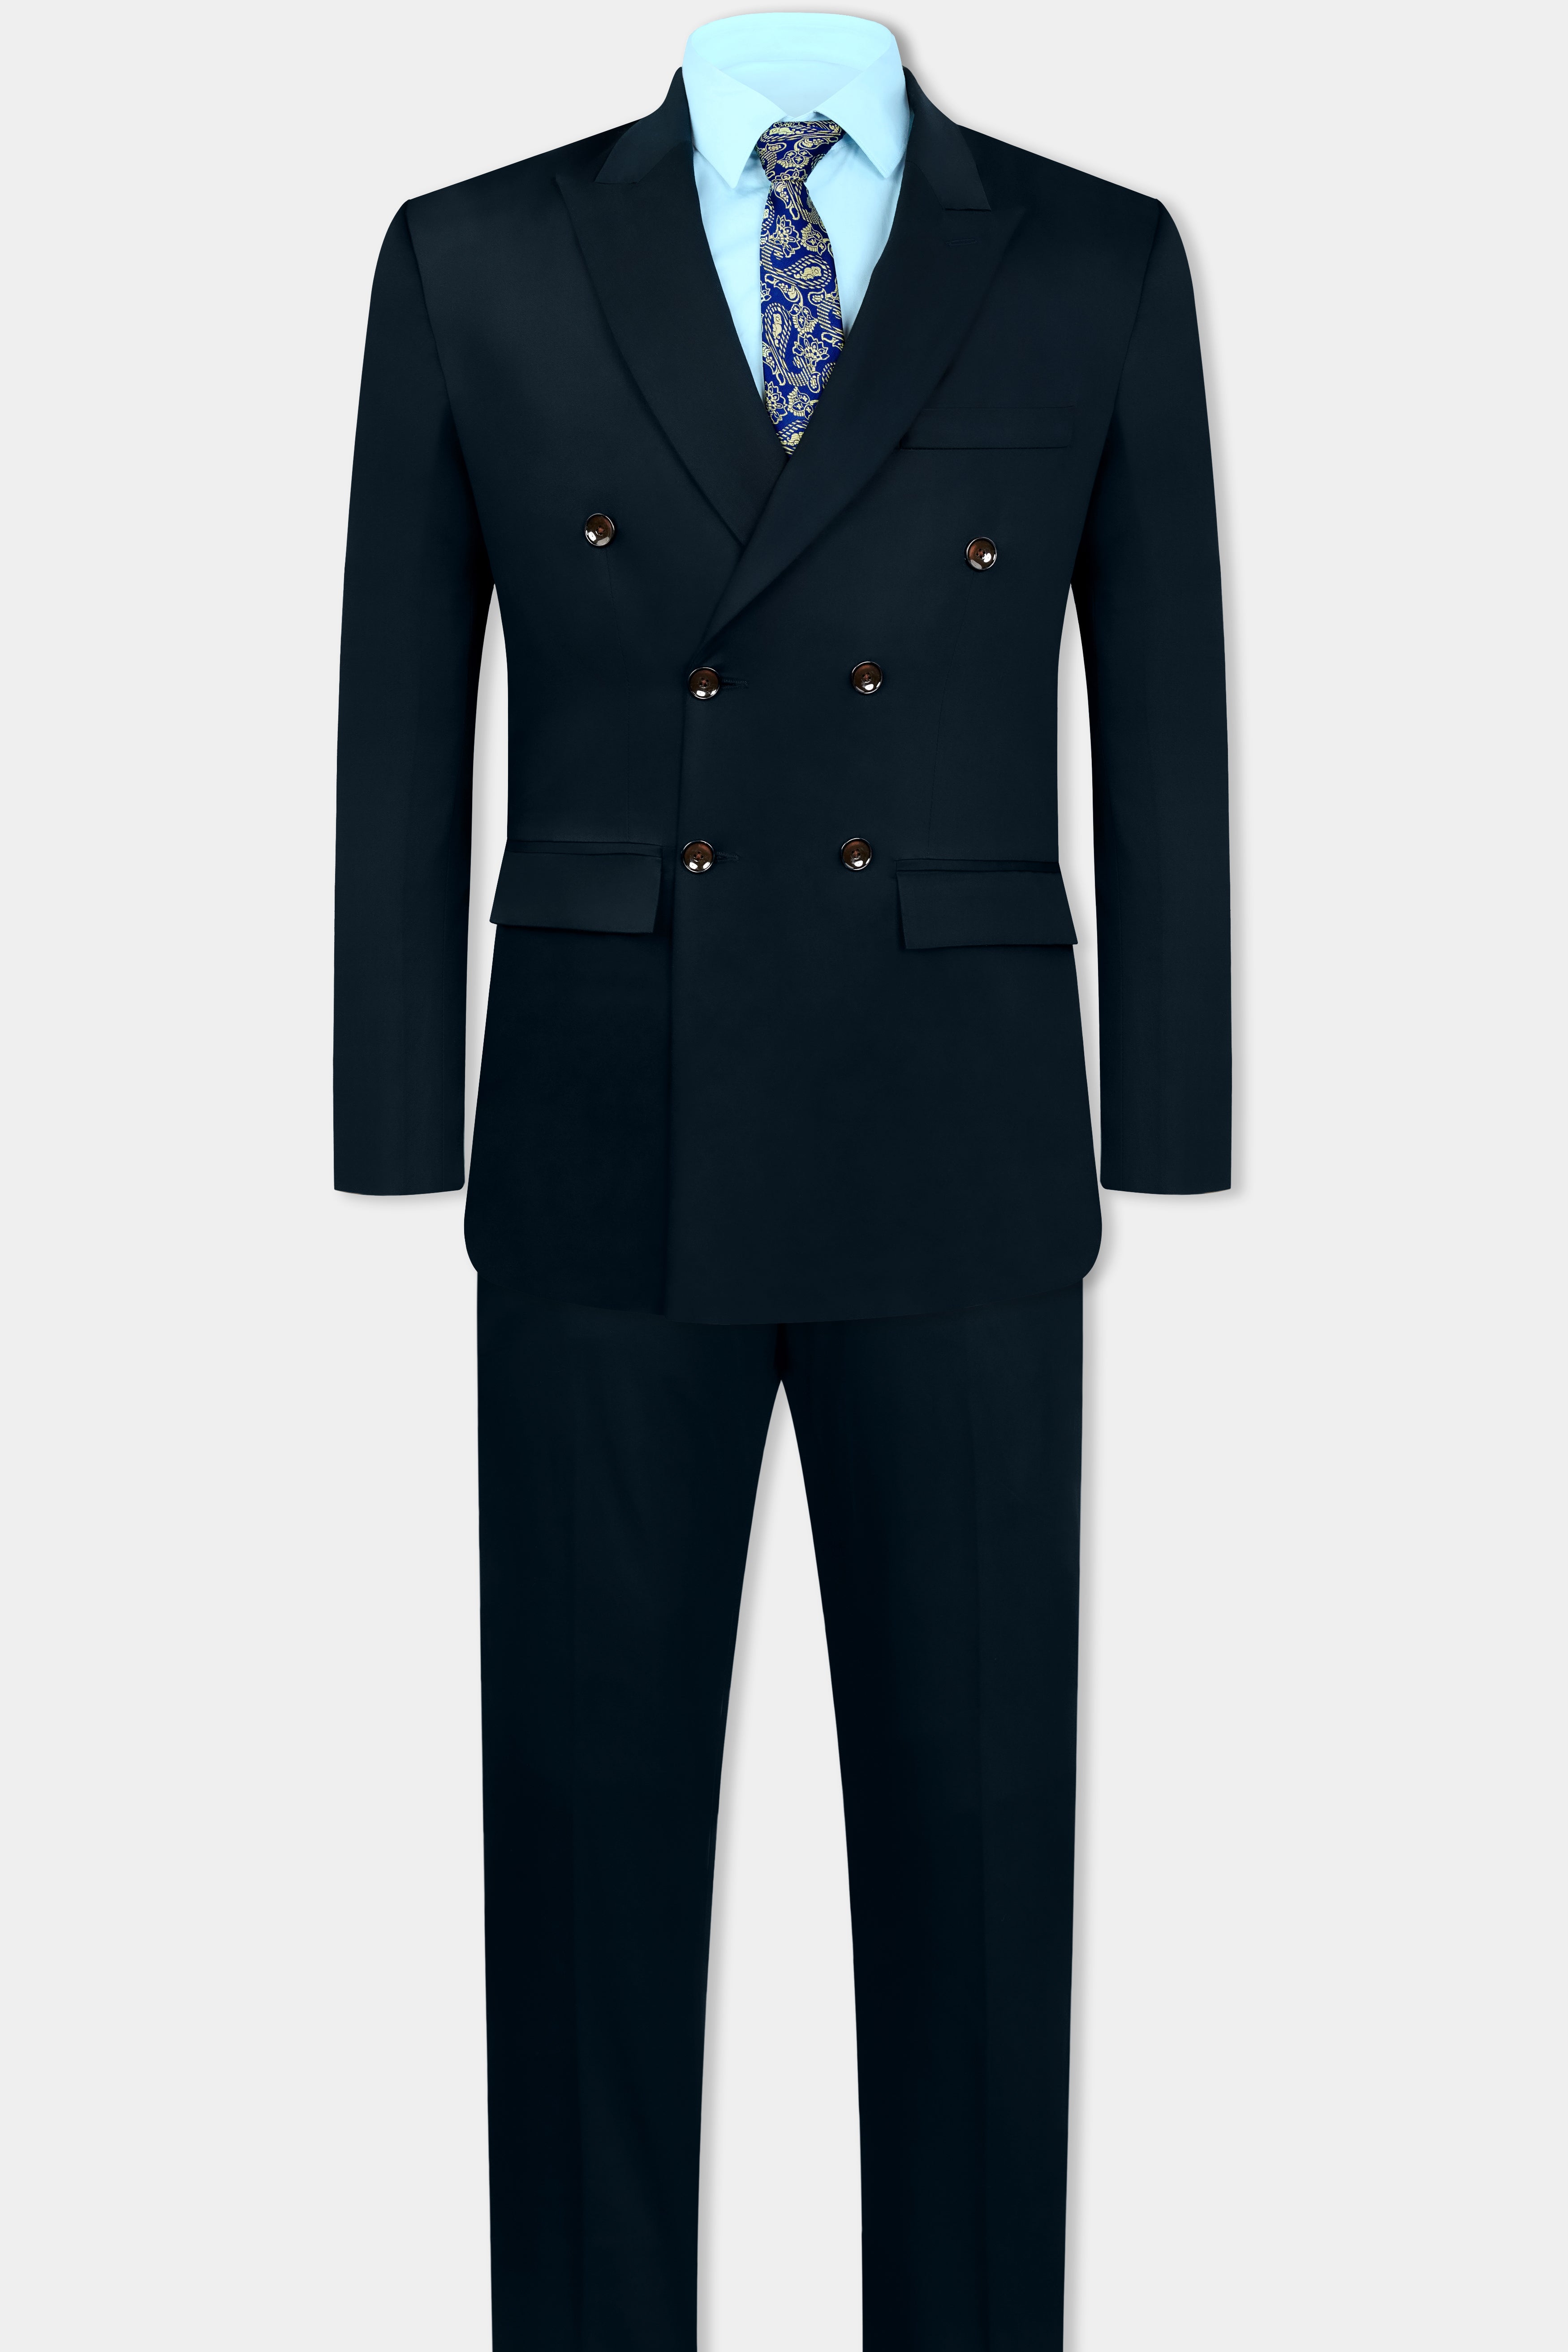 Bunker Blue Premium Cotton Double Breasted Suit ST3115-DB-36, ST3115-DB-38, ST3115-DB-40, ST3115-DB-42, ST3115-DB-44, ST3115-DB-46, ST3115-DB-48, ST3115-DB-50, ST3115-DB-52, ST3115-DB-54, ST3115-DB-56, ST3115-DB-58, ST3115-DB-60